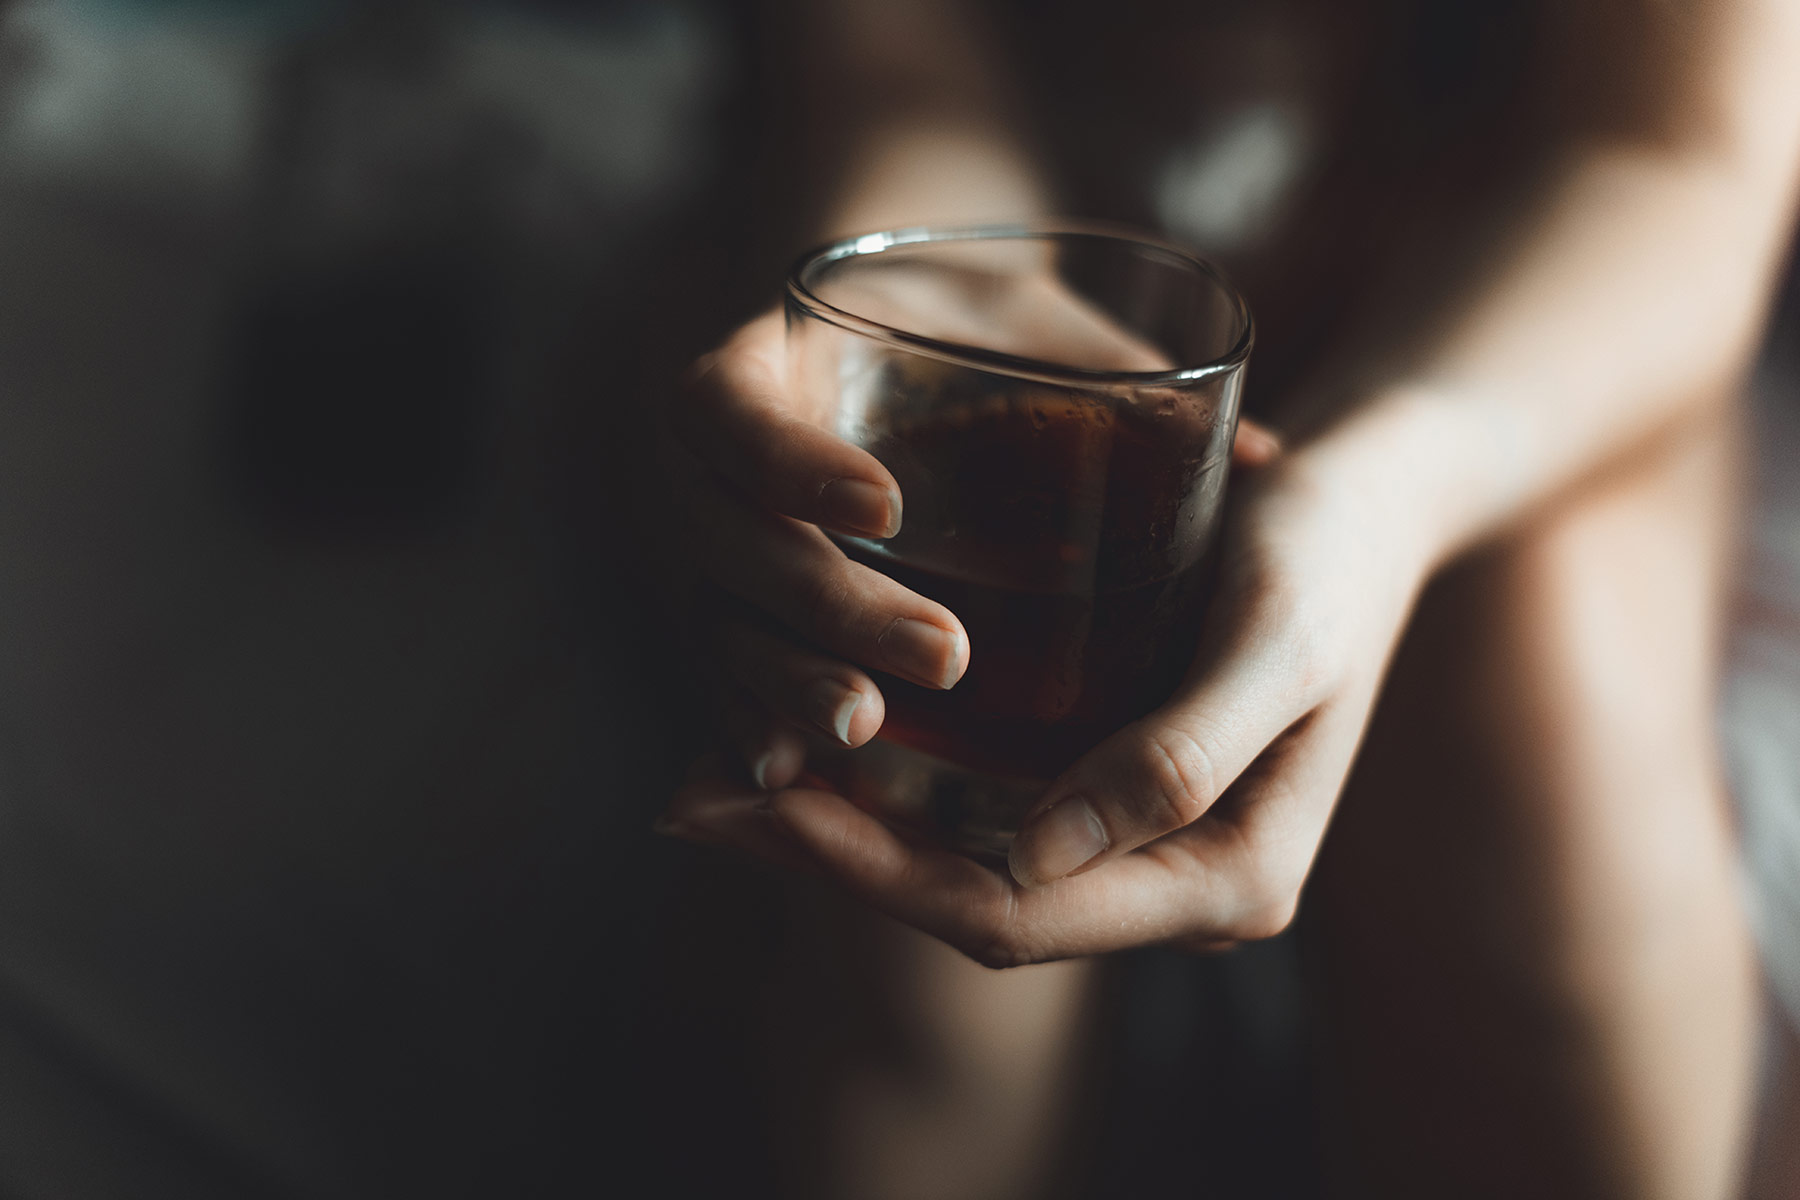 Jennifer Wider, US alcohol consumption, excess alcohol consumption during pandemic, US alcohol industry worth, addiction news, rise in addiction during pandemic, health news, women alcohol use rise, alcohol related diseases, alcohol risks